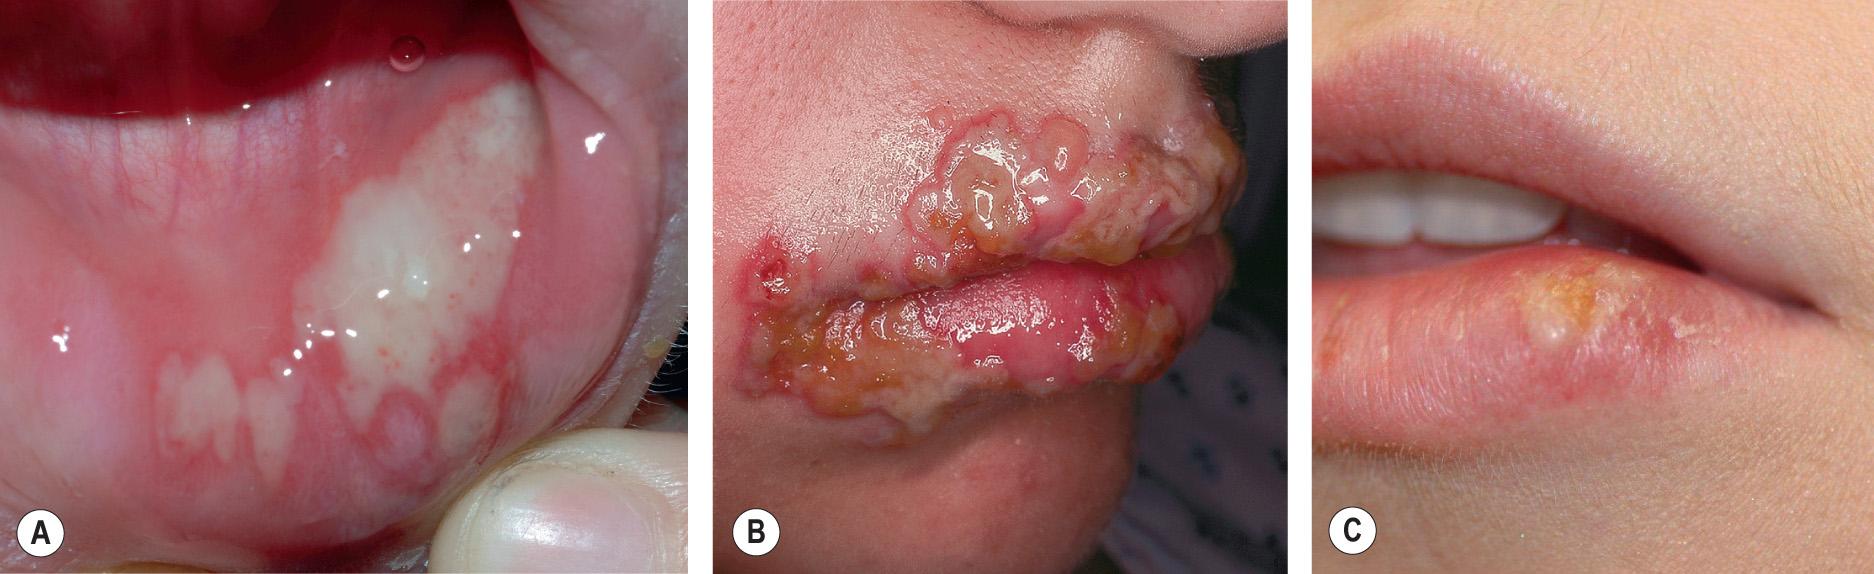 Fig. 80.1, Orolabial herpes simplex virus (HSV) infections.